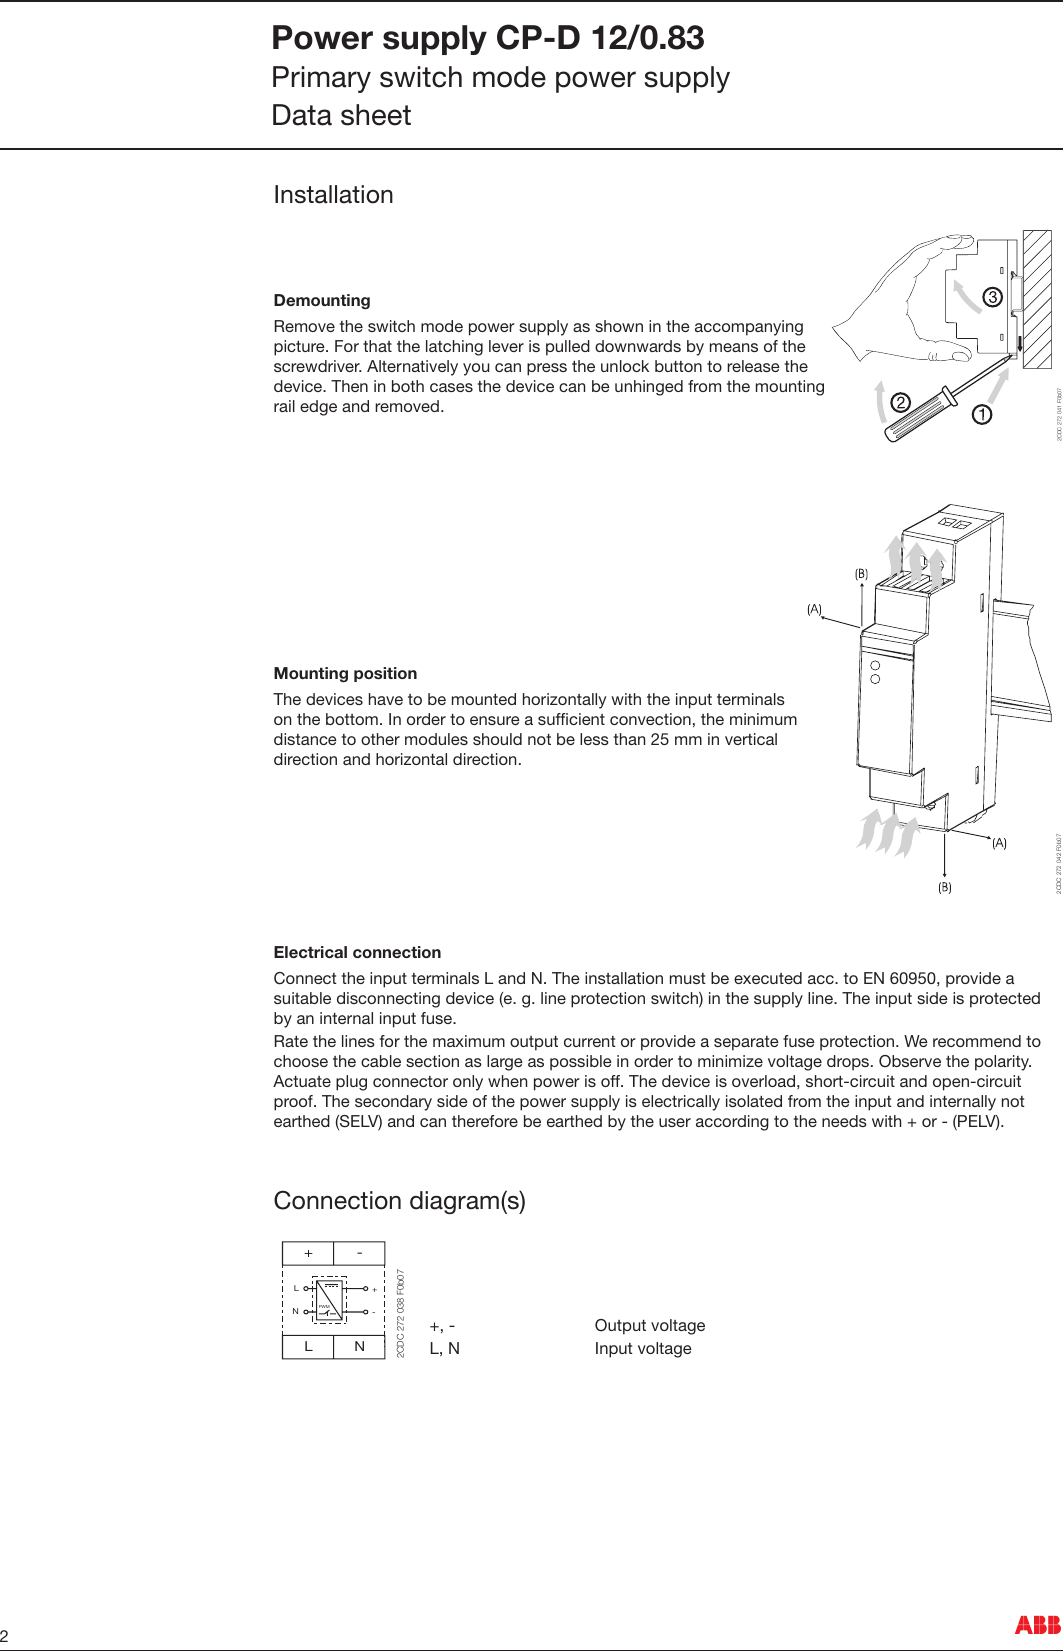 Page 2 of 9 - Primary Switch Mode Power Supply CP-D 12/0.83